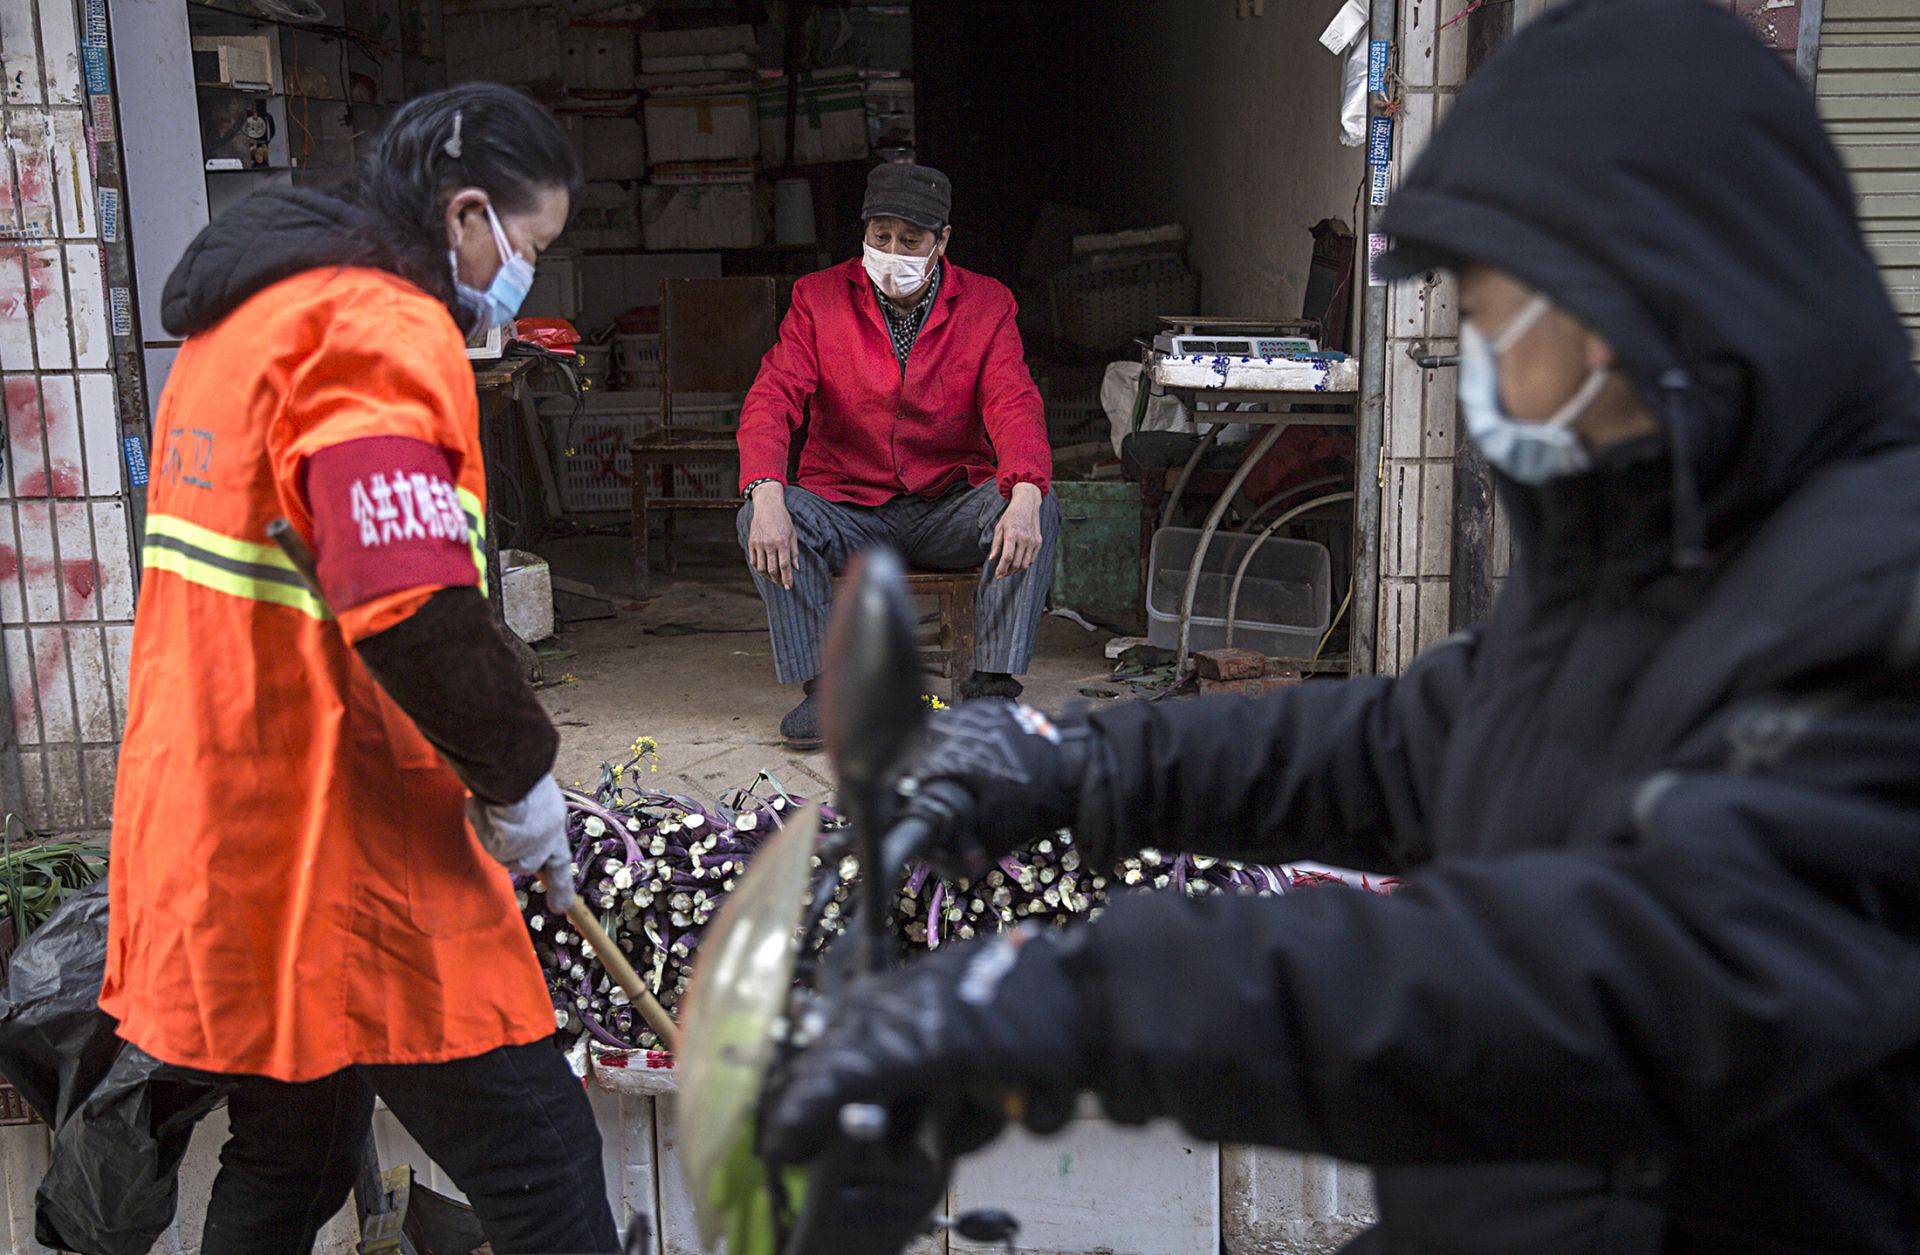 This photo shows a masked vendor and customers of his wares in an alley in Wuhan, China, on January 31, 2020.